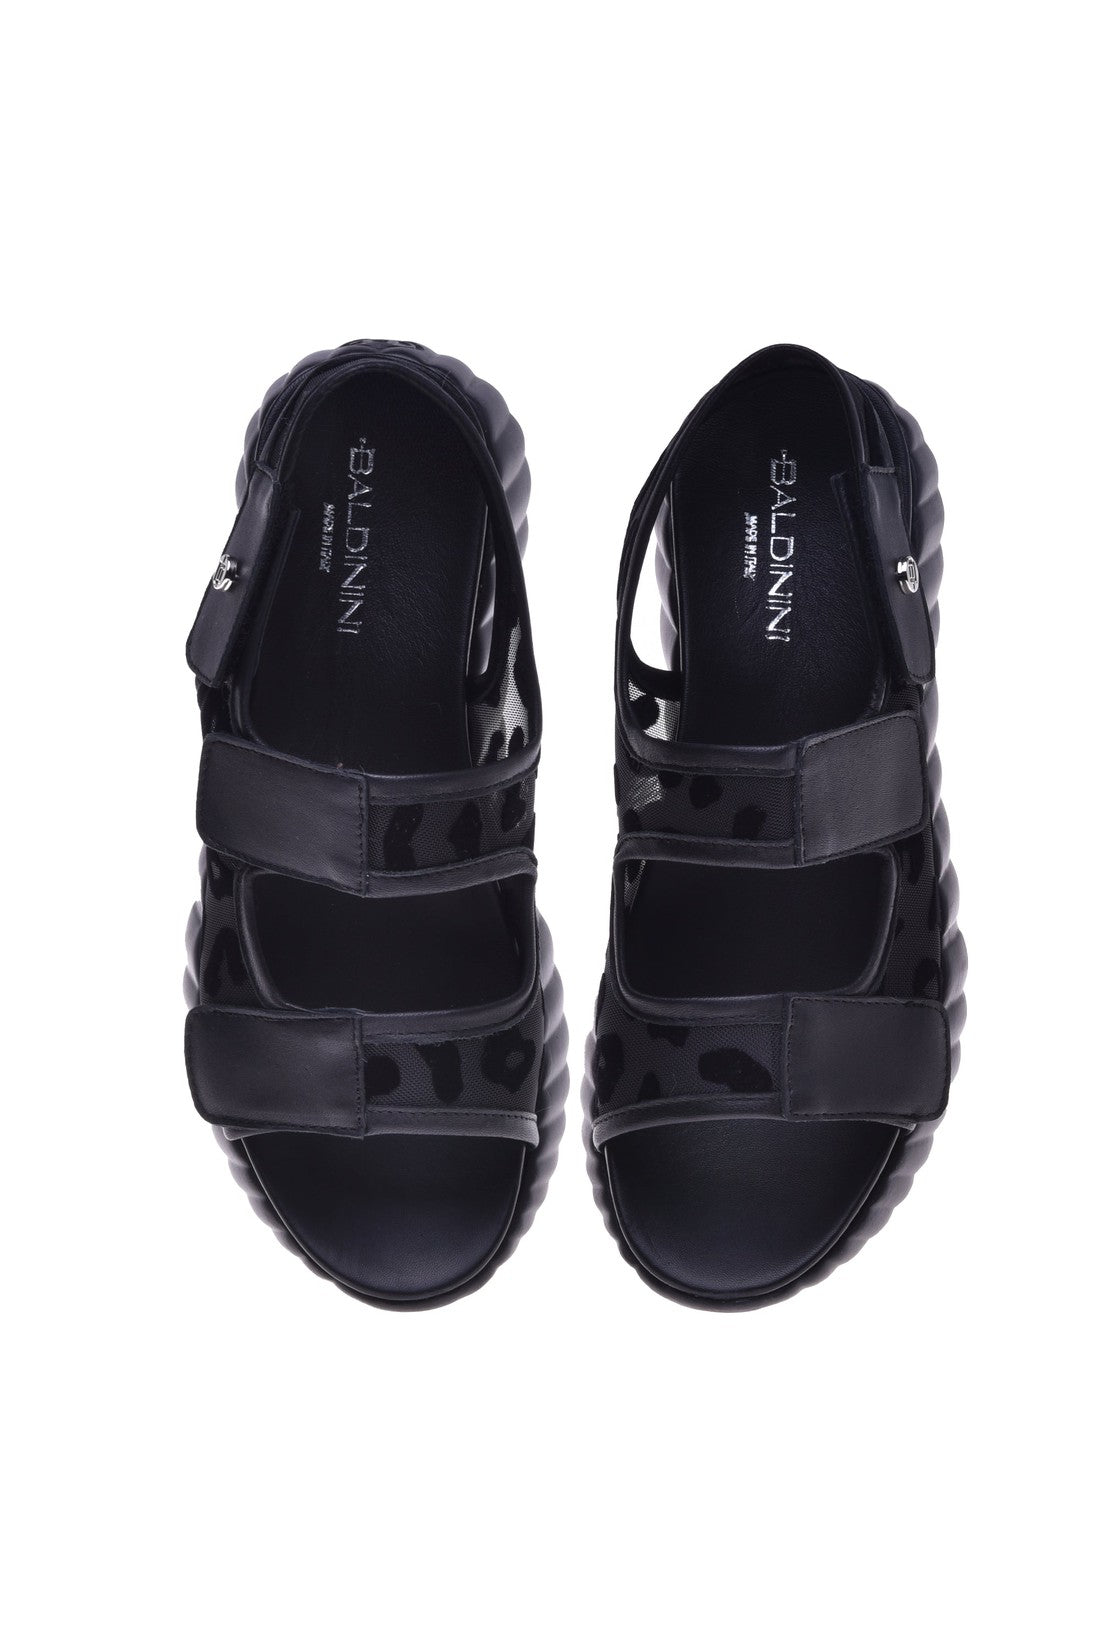 Sandal in black nappa leather and lace